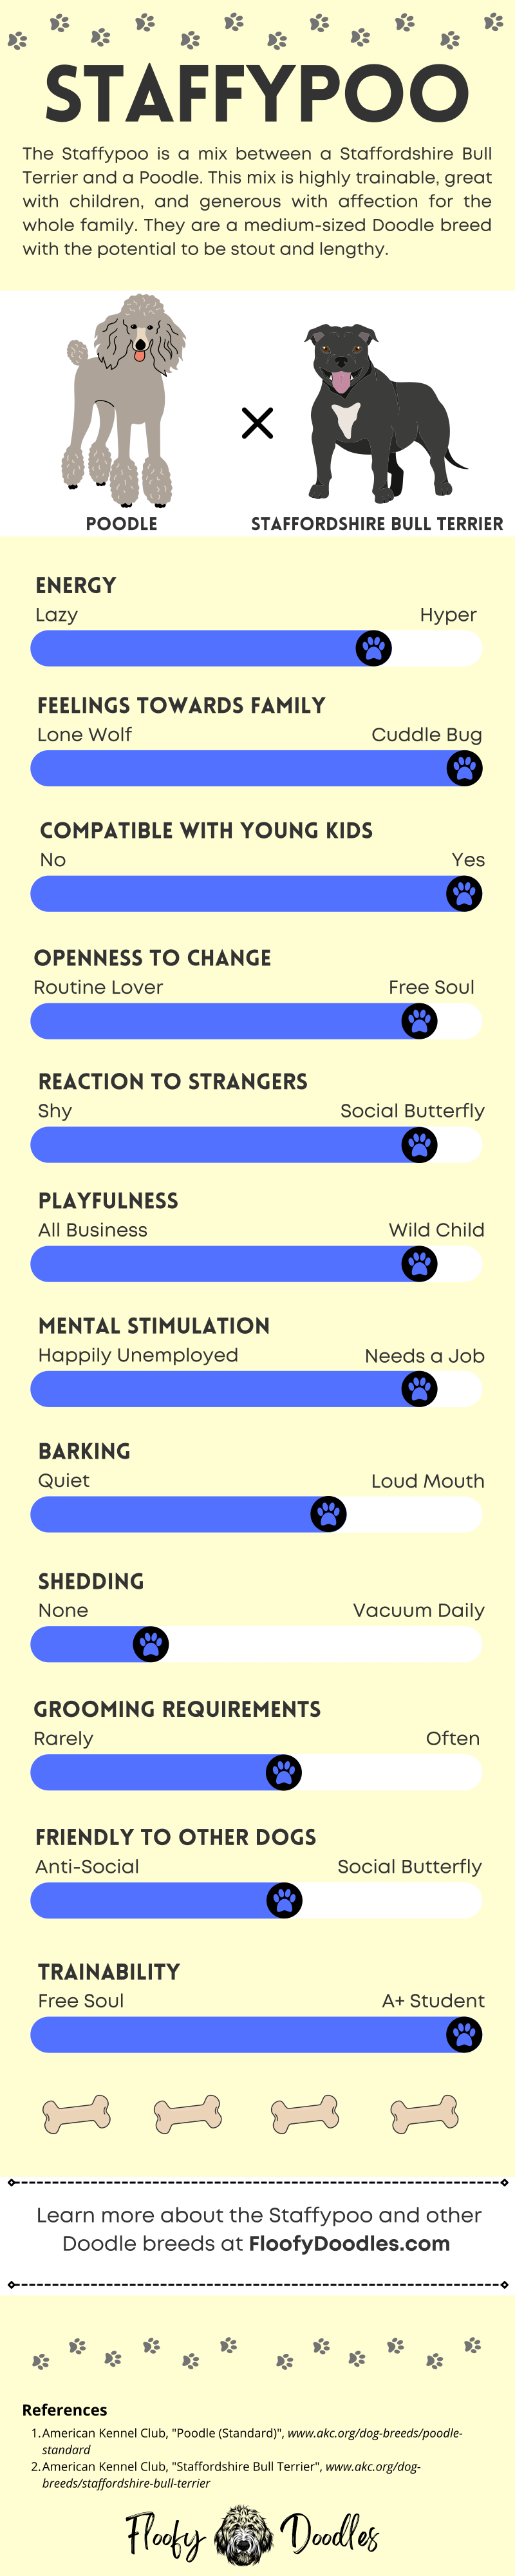 Infographic showing the Staffypoo's traits and characteristics